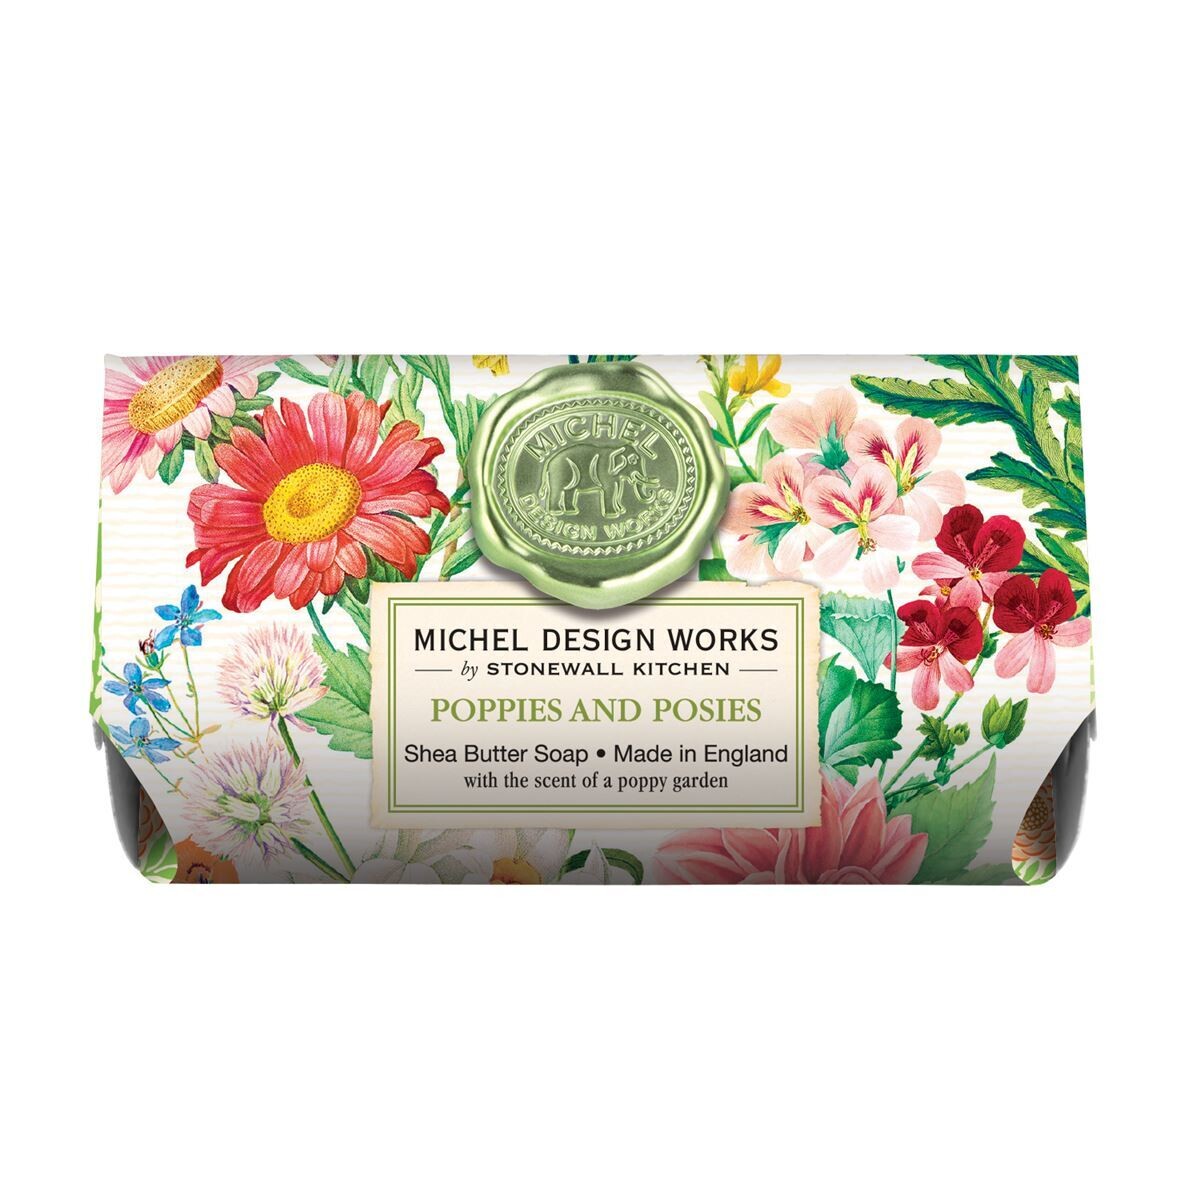 Poppies and Posies Bath Soap Bar